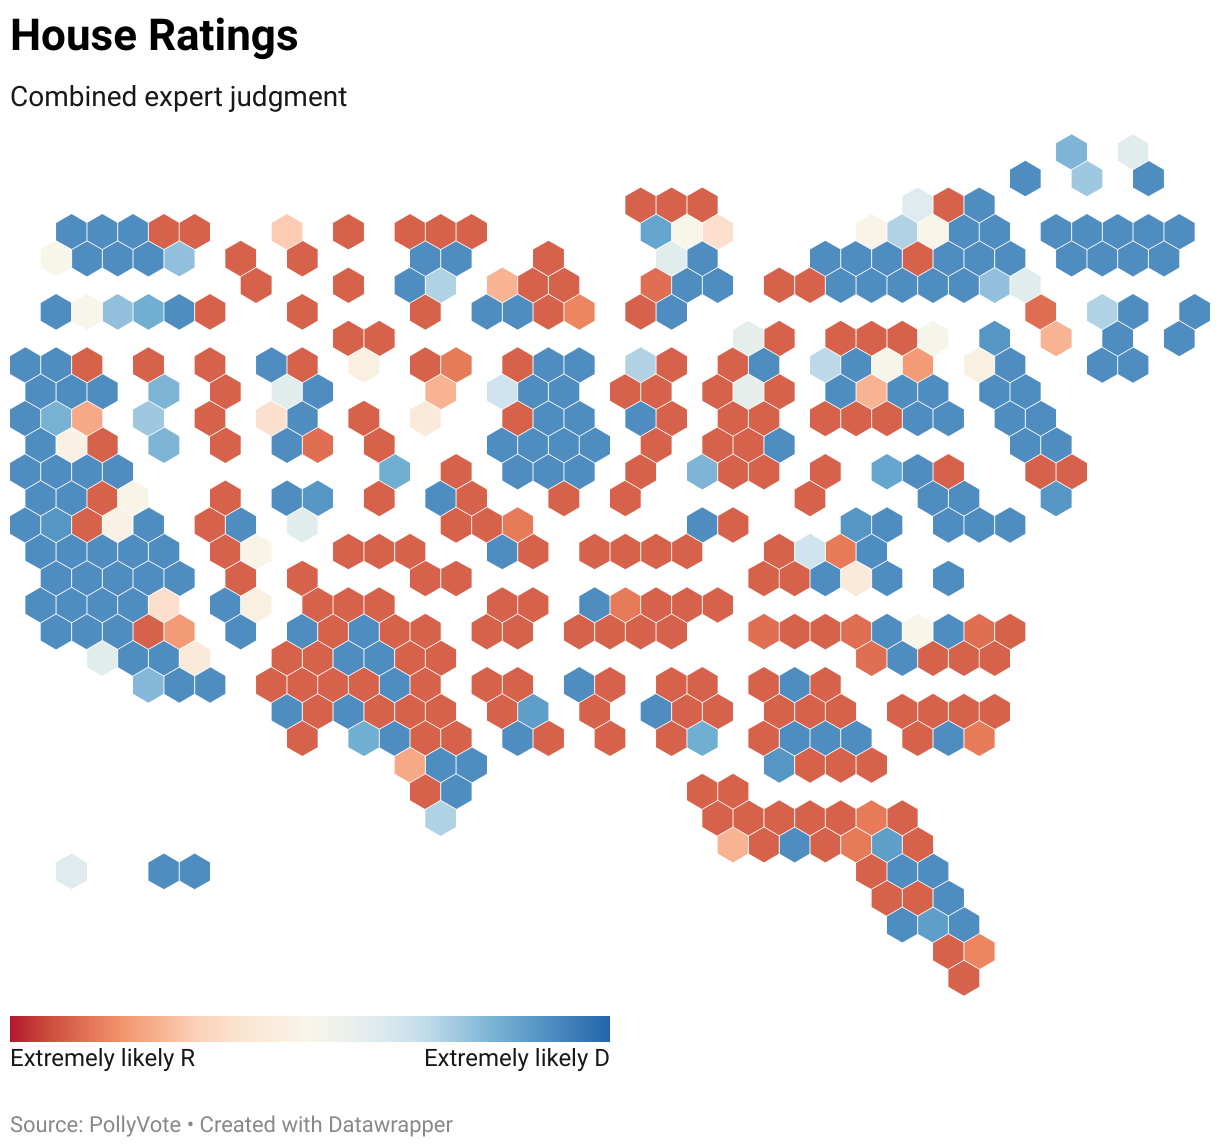 combined expert judgment House ratings for the 2024 U.S. House of Representatives Election